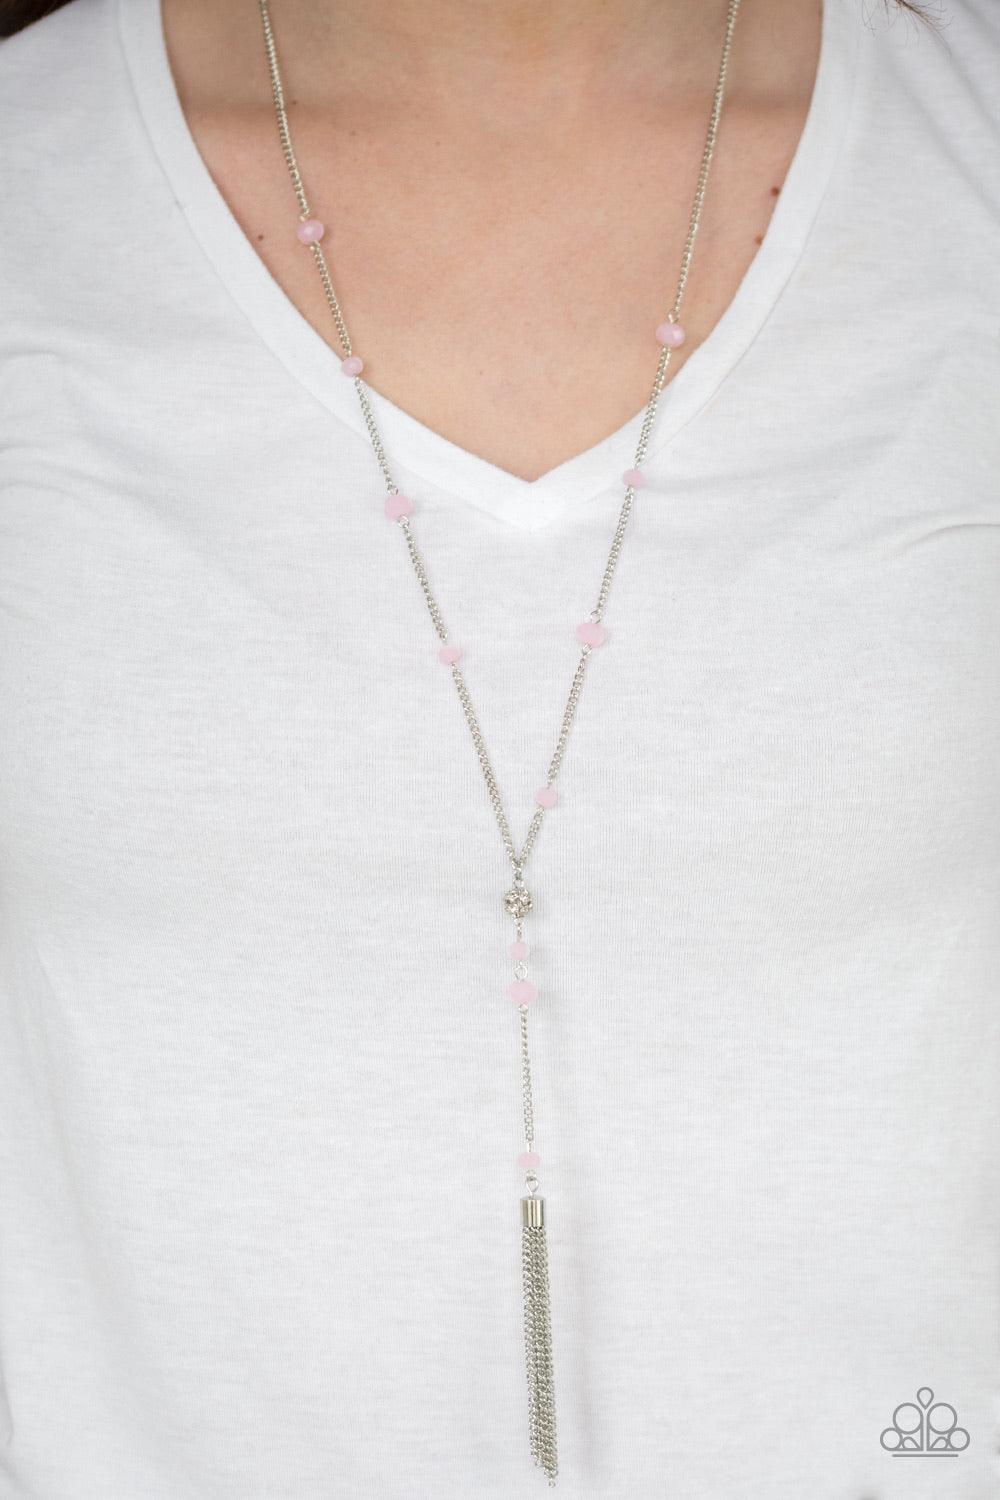 Paparazzi Accessories Out All Night - Pink Pink crystal-like beads trickle down a shimmery silver chain. Encrusted in white rhinestones, a silver bead gives way to a chain extension dotted in matching crystal beads for an elegant finish. Features an adjus